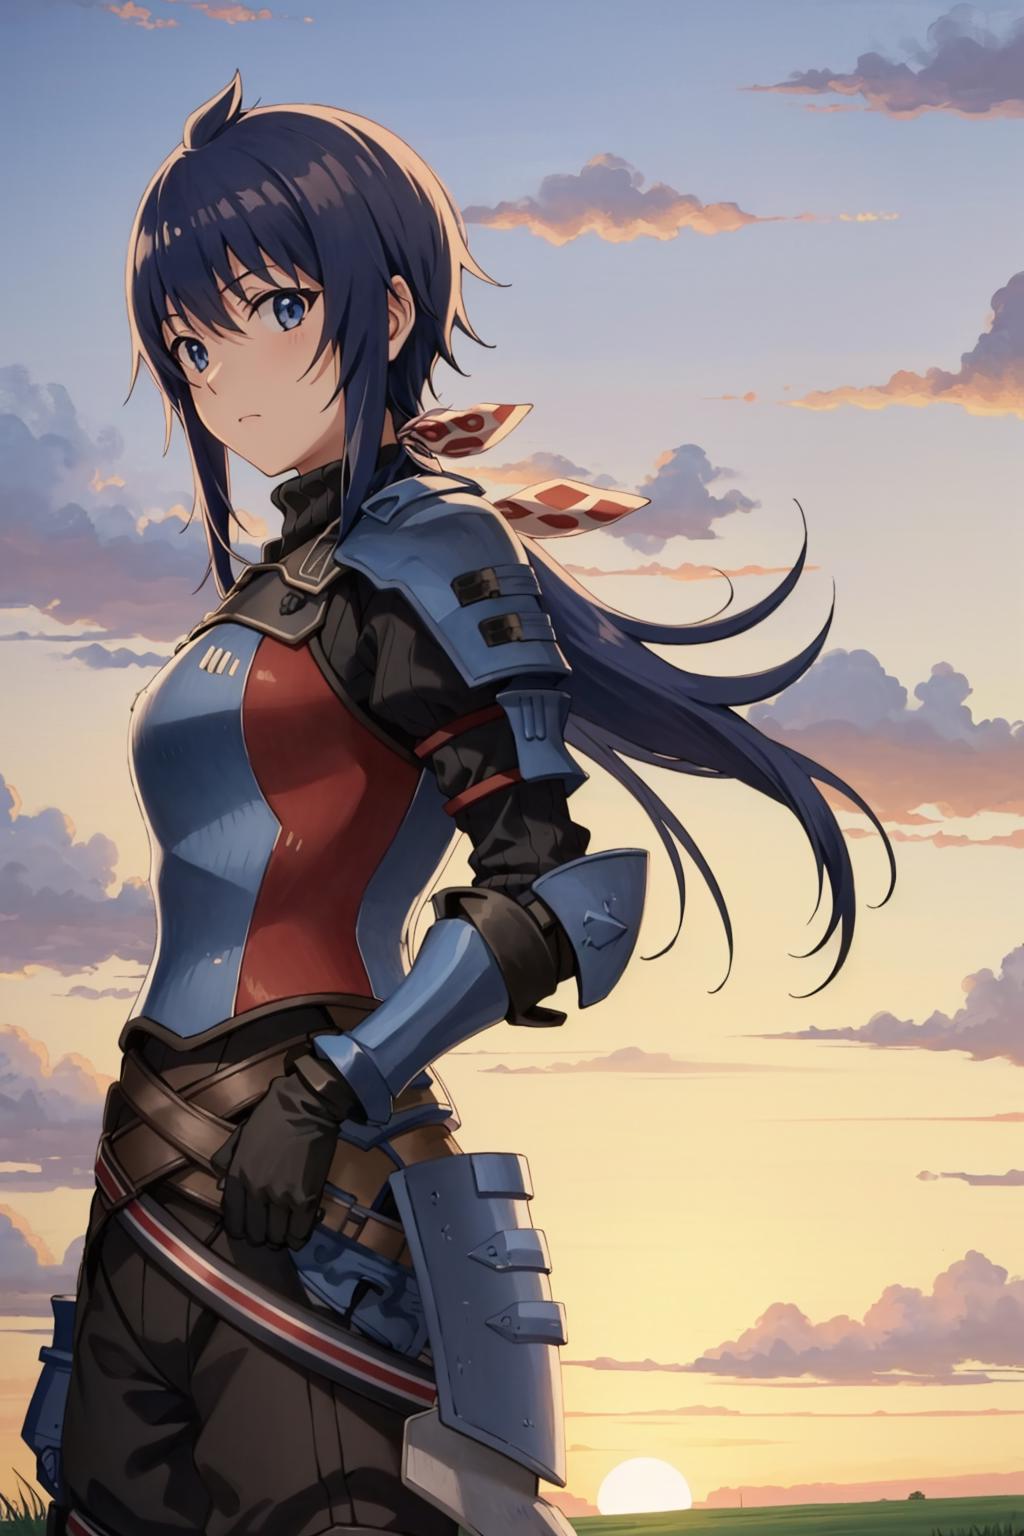 Imca (Valkyria Chronicles 3) LoRA image by novowels